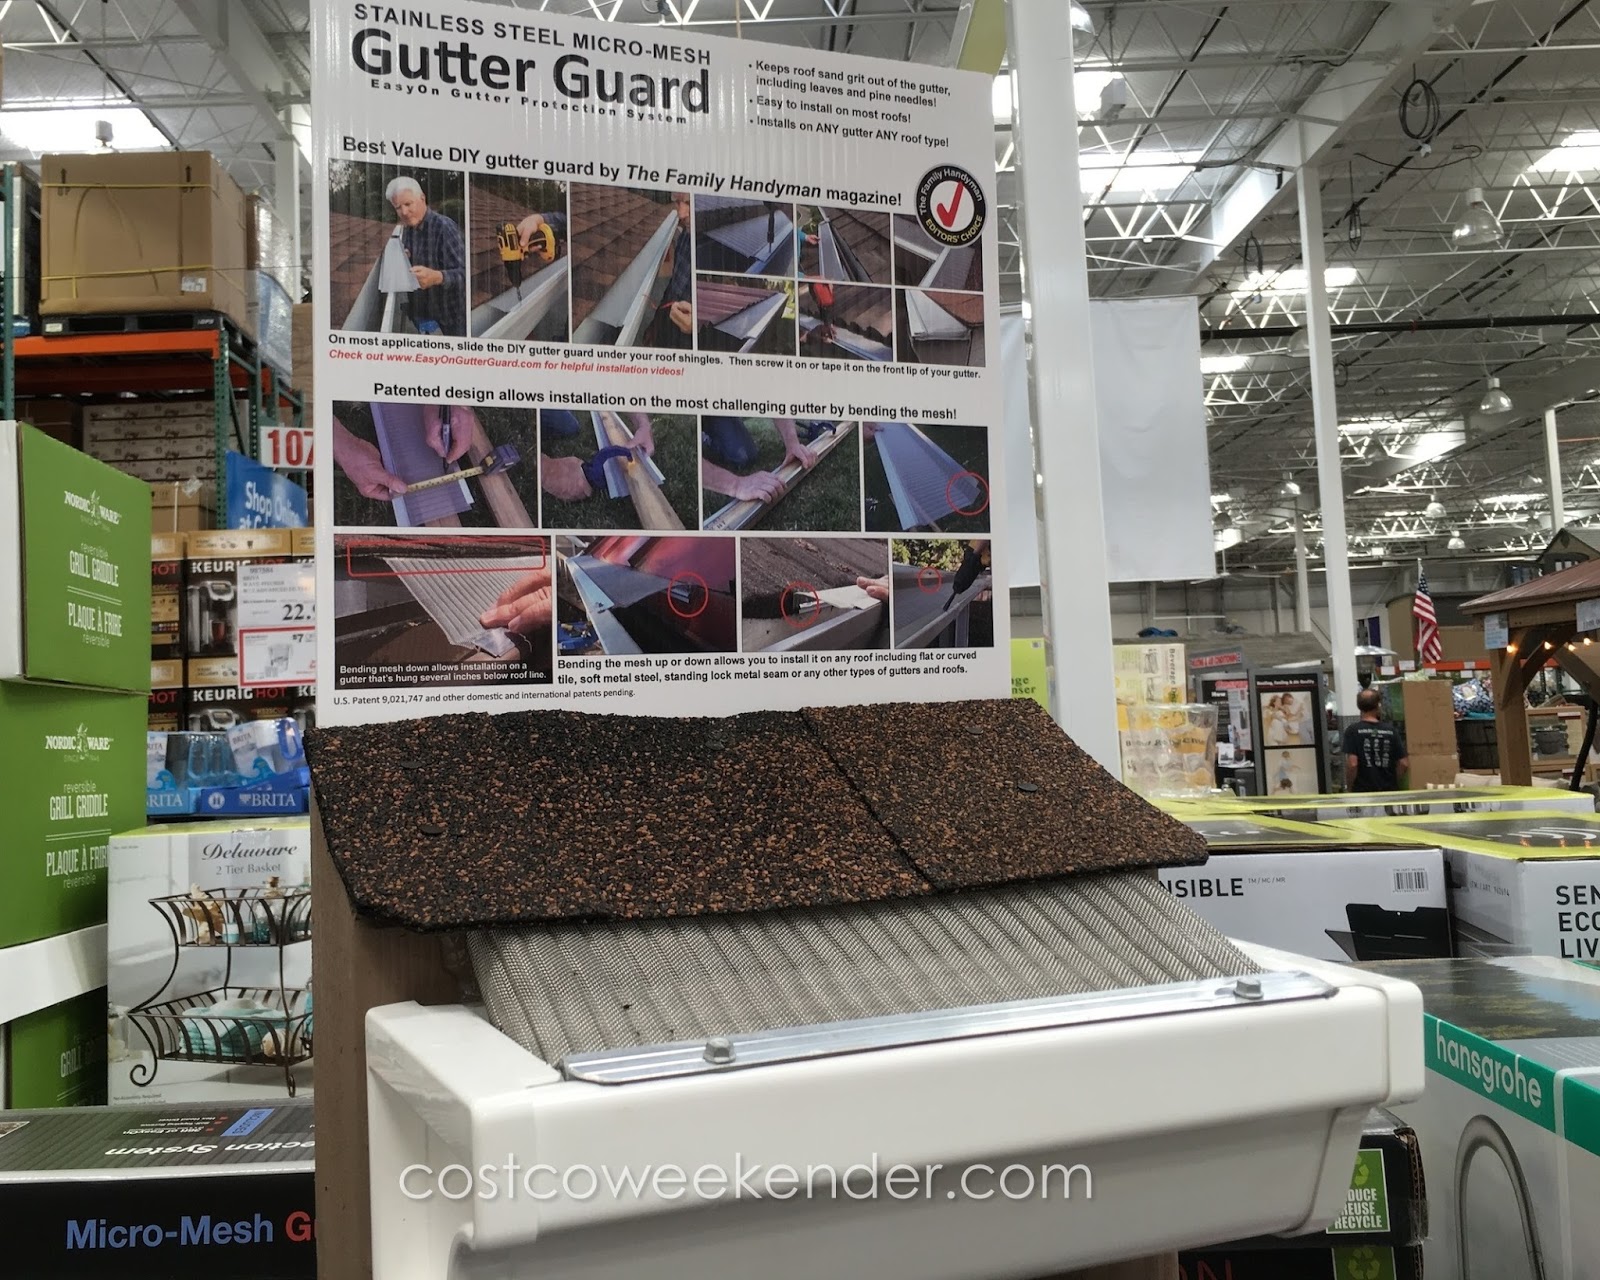 Stainless Steel Micro Mesh Gutter Guard Costco